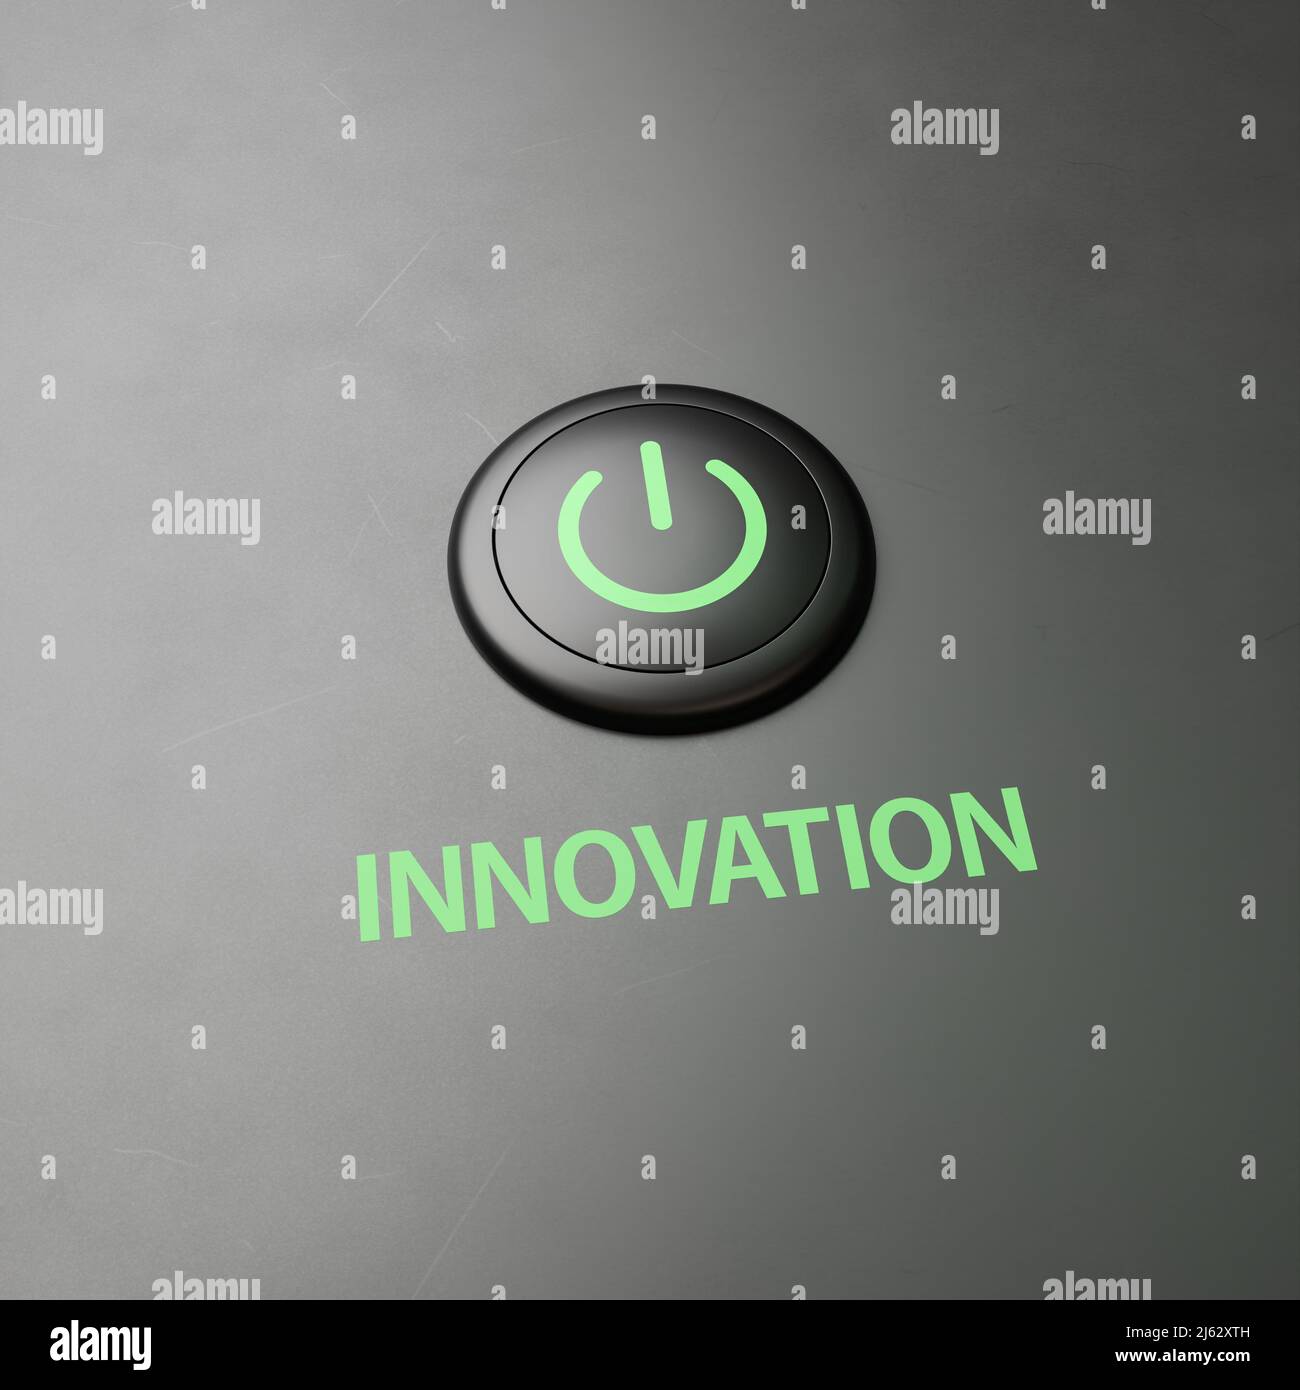 Black button with the word 'innovation' as a label - concept for implementing measures to switch on innovation. Copy space around for better cropping Stock Photo